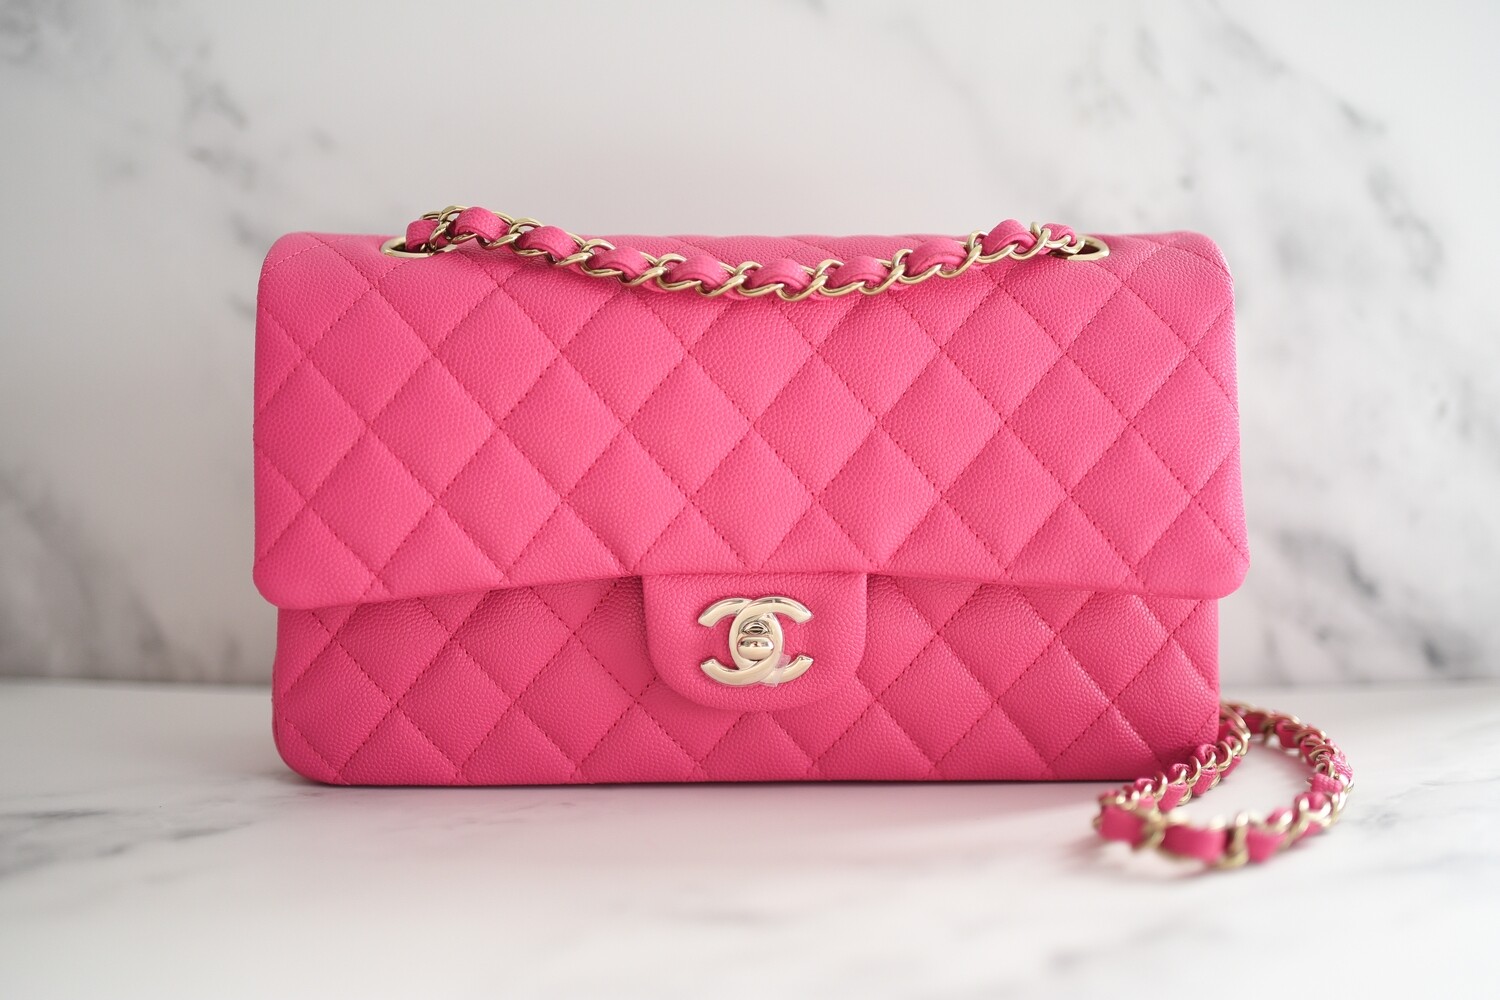 pink chanel classic double